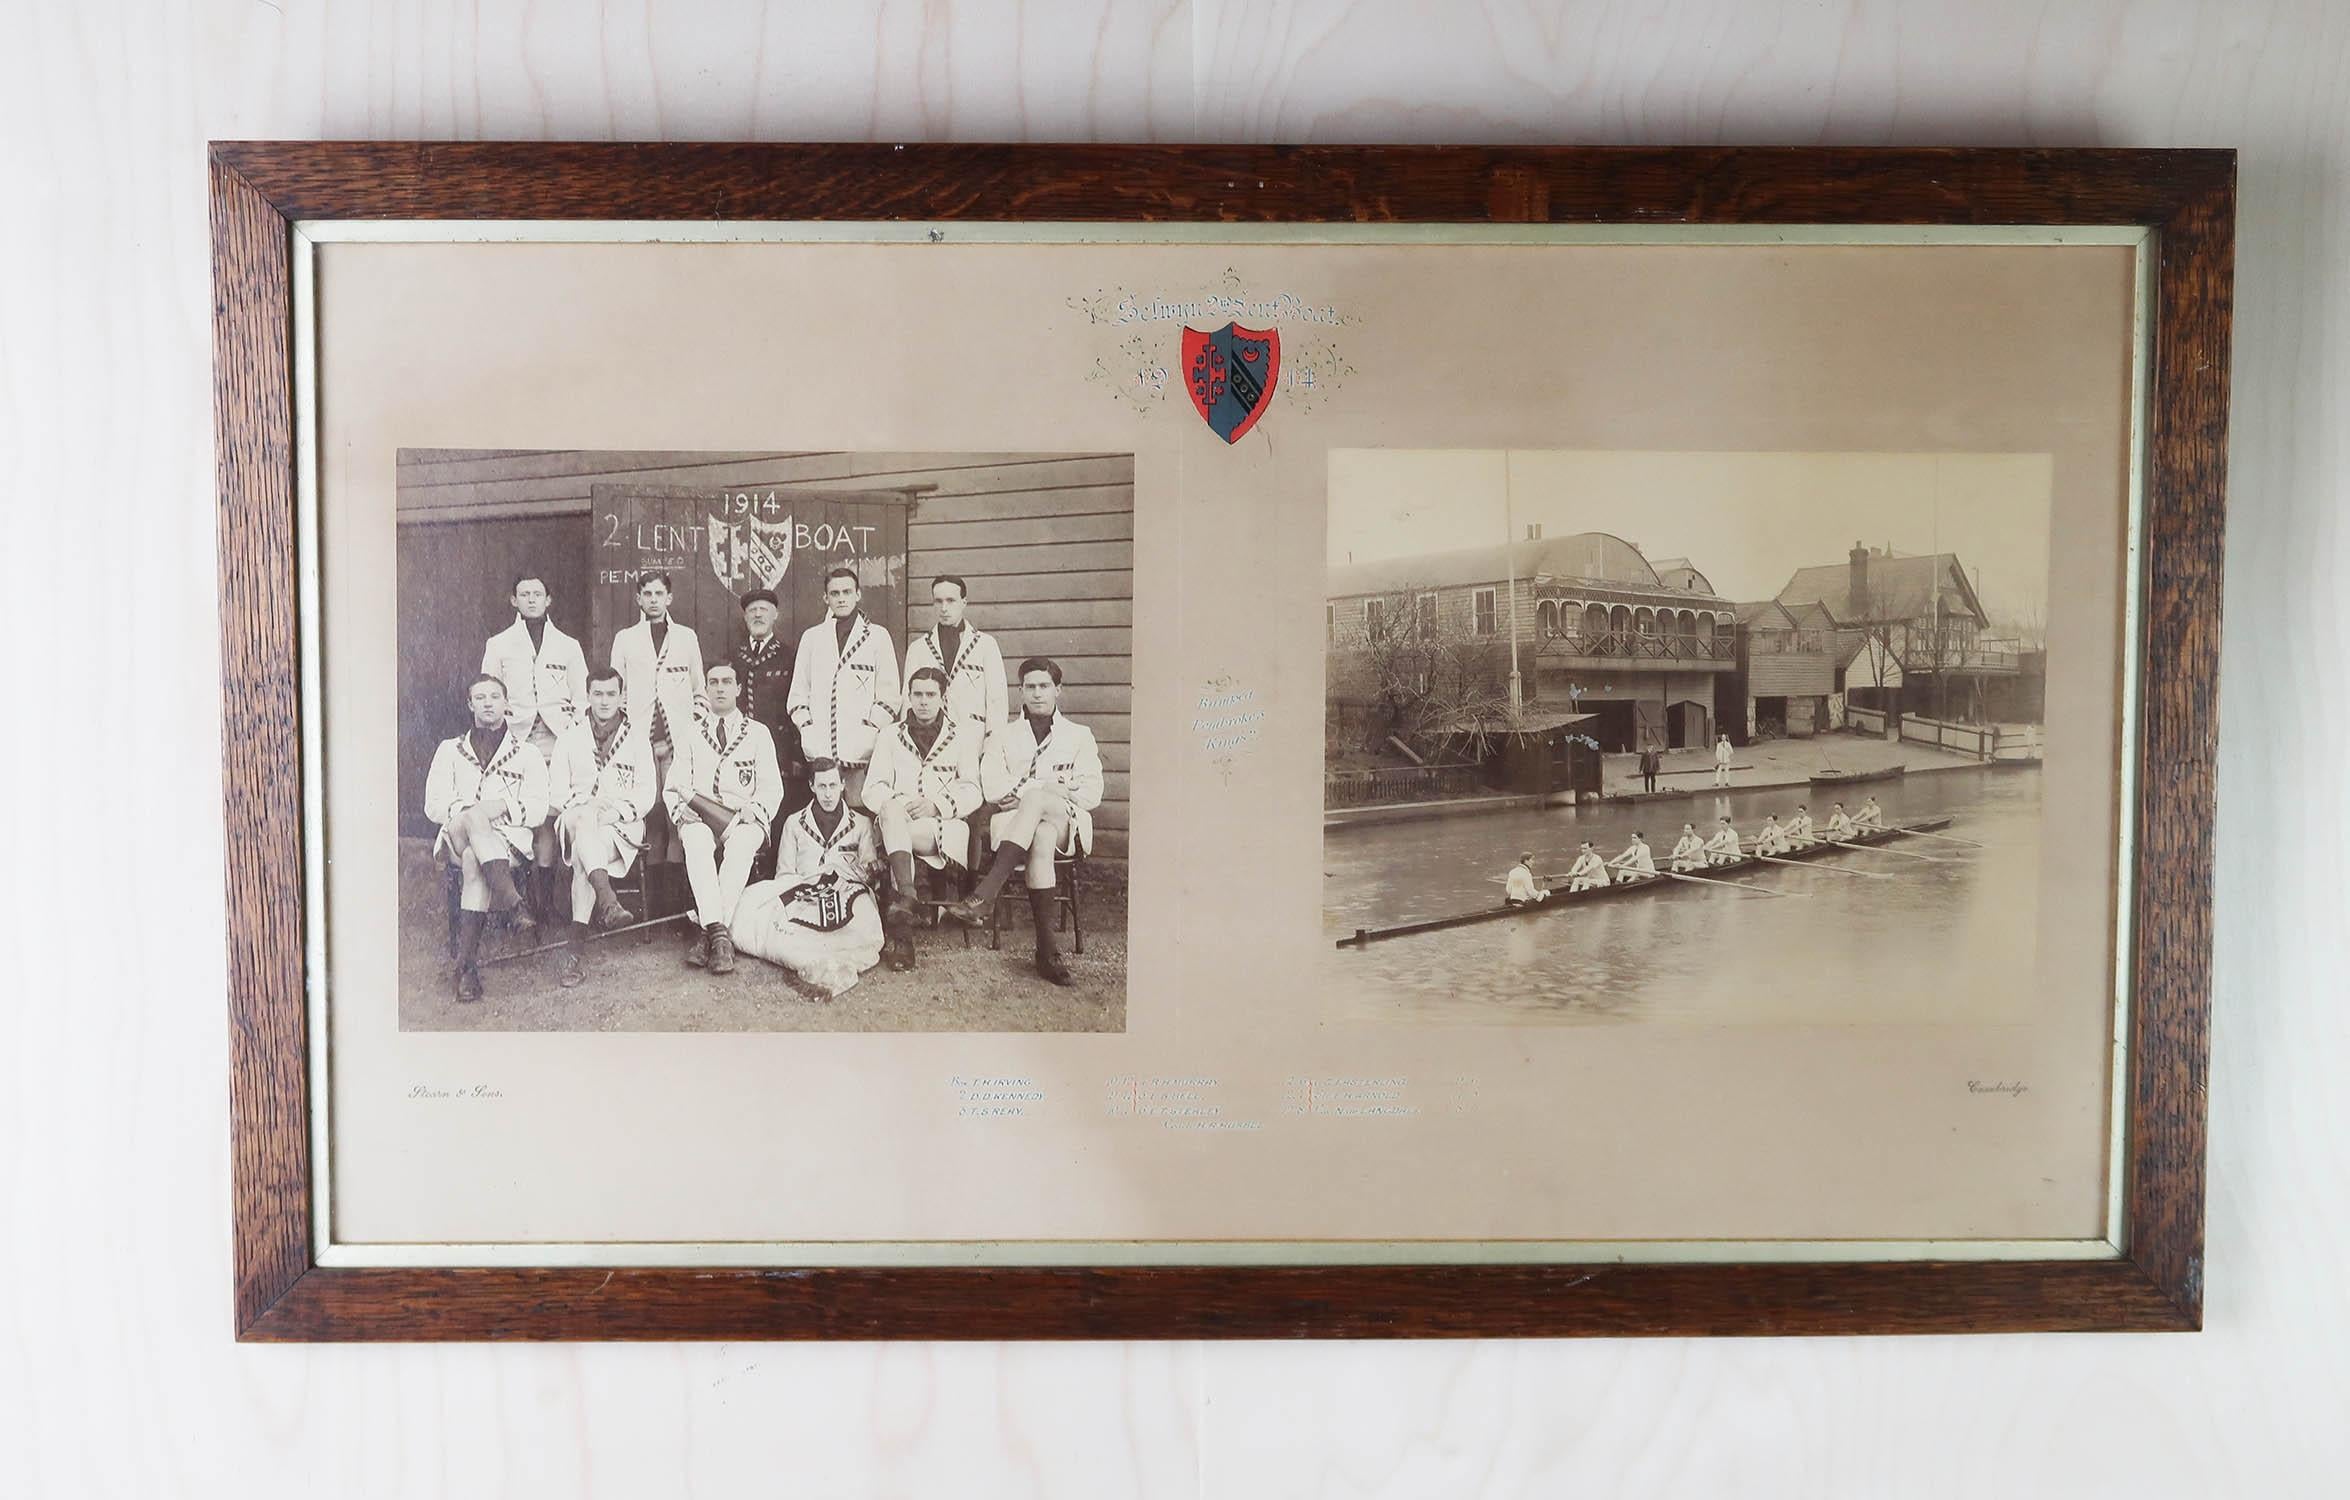 Wonderful photographs of a Cambridge rowing team

Albumen prints laid down on card

Photograph by Stearn, Cambridge. Dated 1914

Original oak frame

Slight surface loss on the boat house area

Free UK shipping



